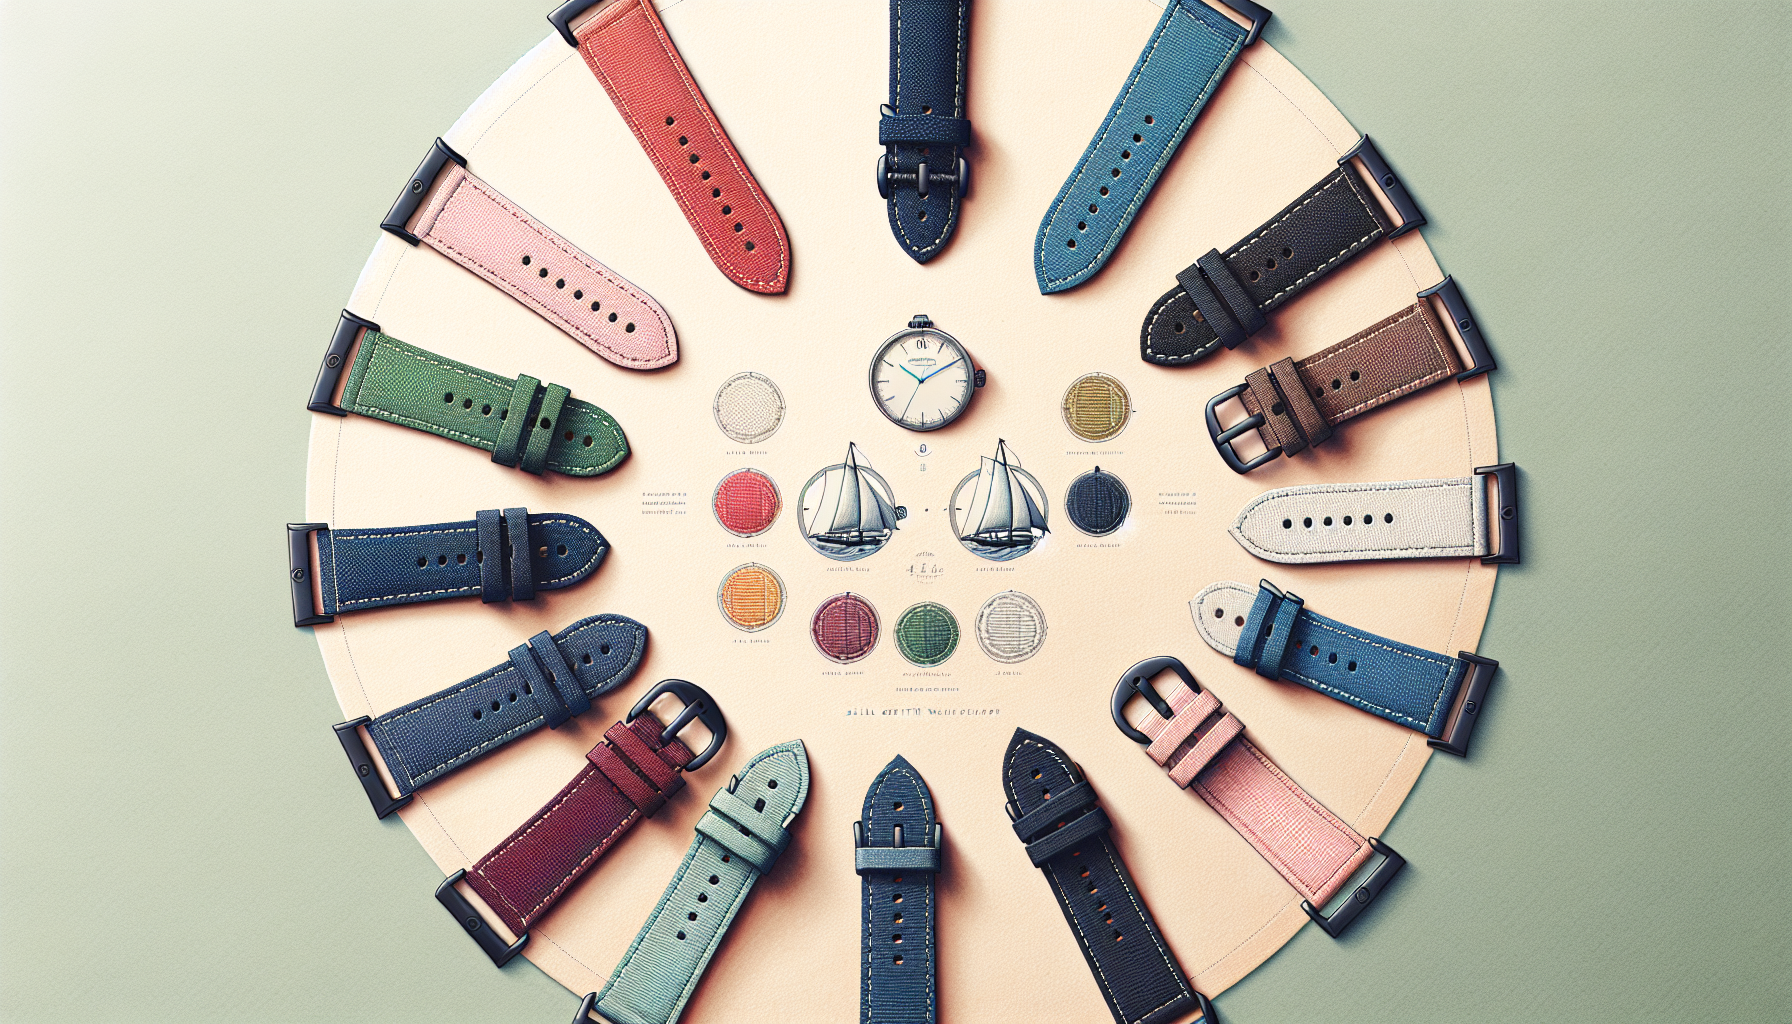 Illustration of a collection of sailcloth watch straps in various colors